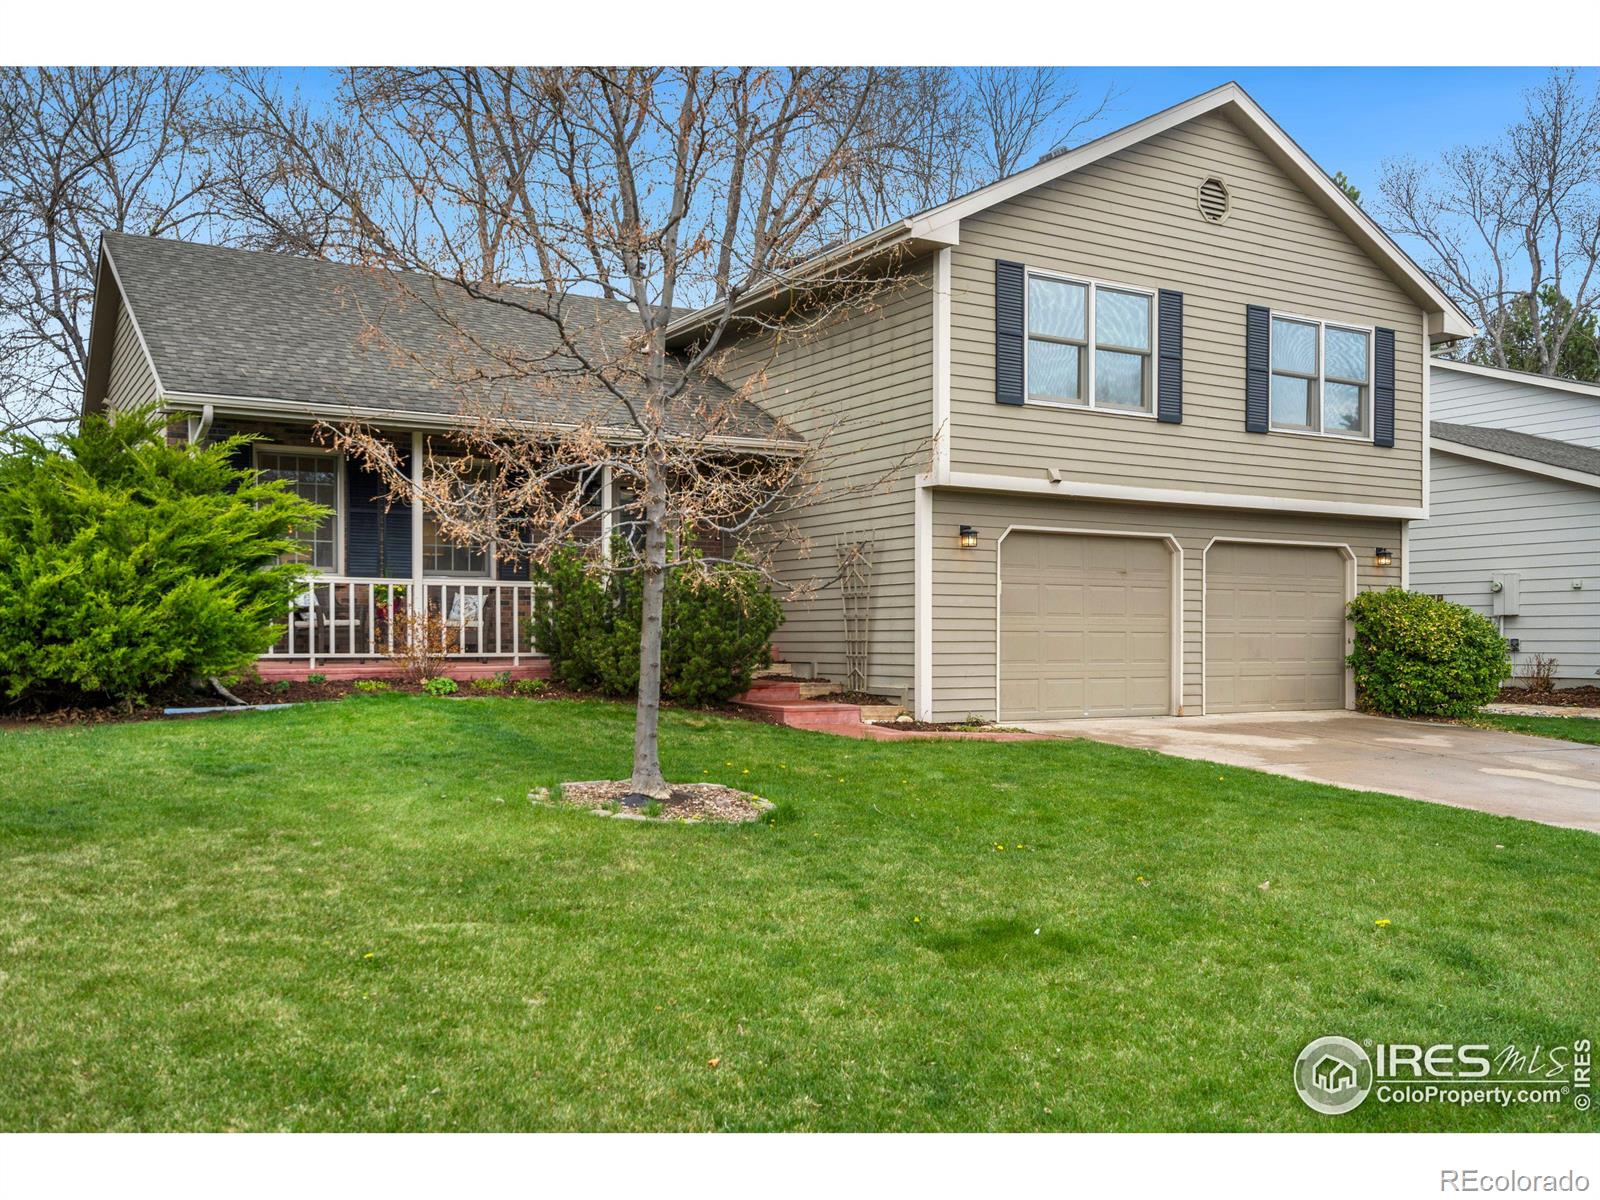 Report Image for 3341  Pineridge Place,Fort Collins, Colorado